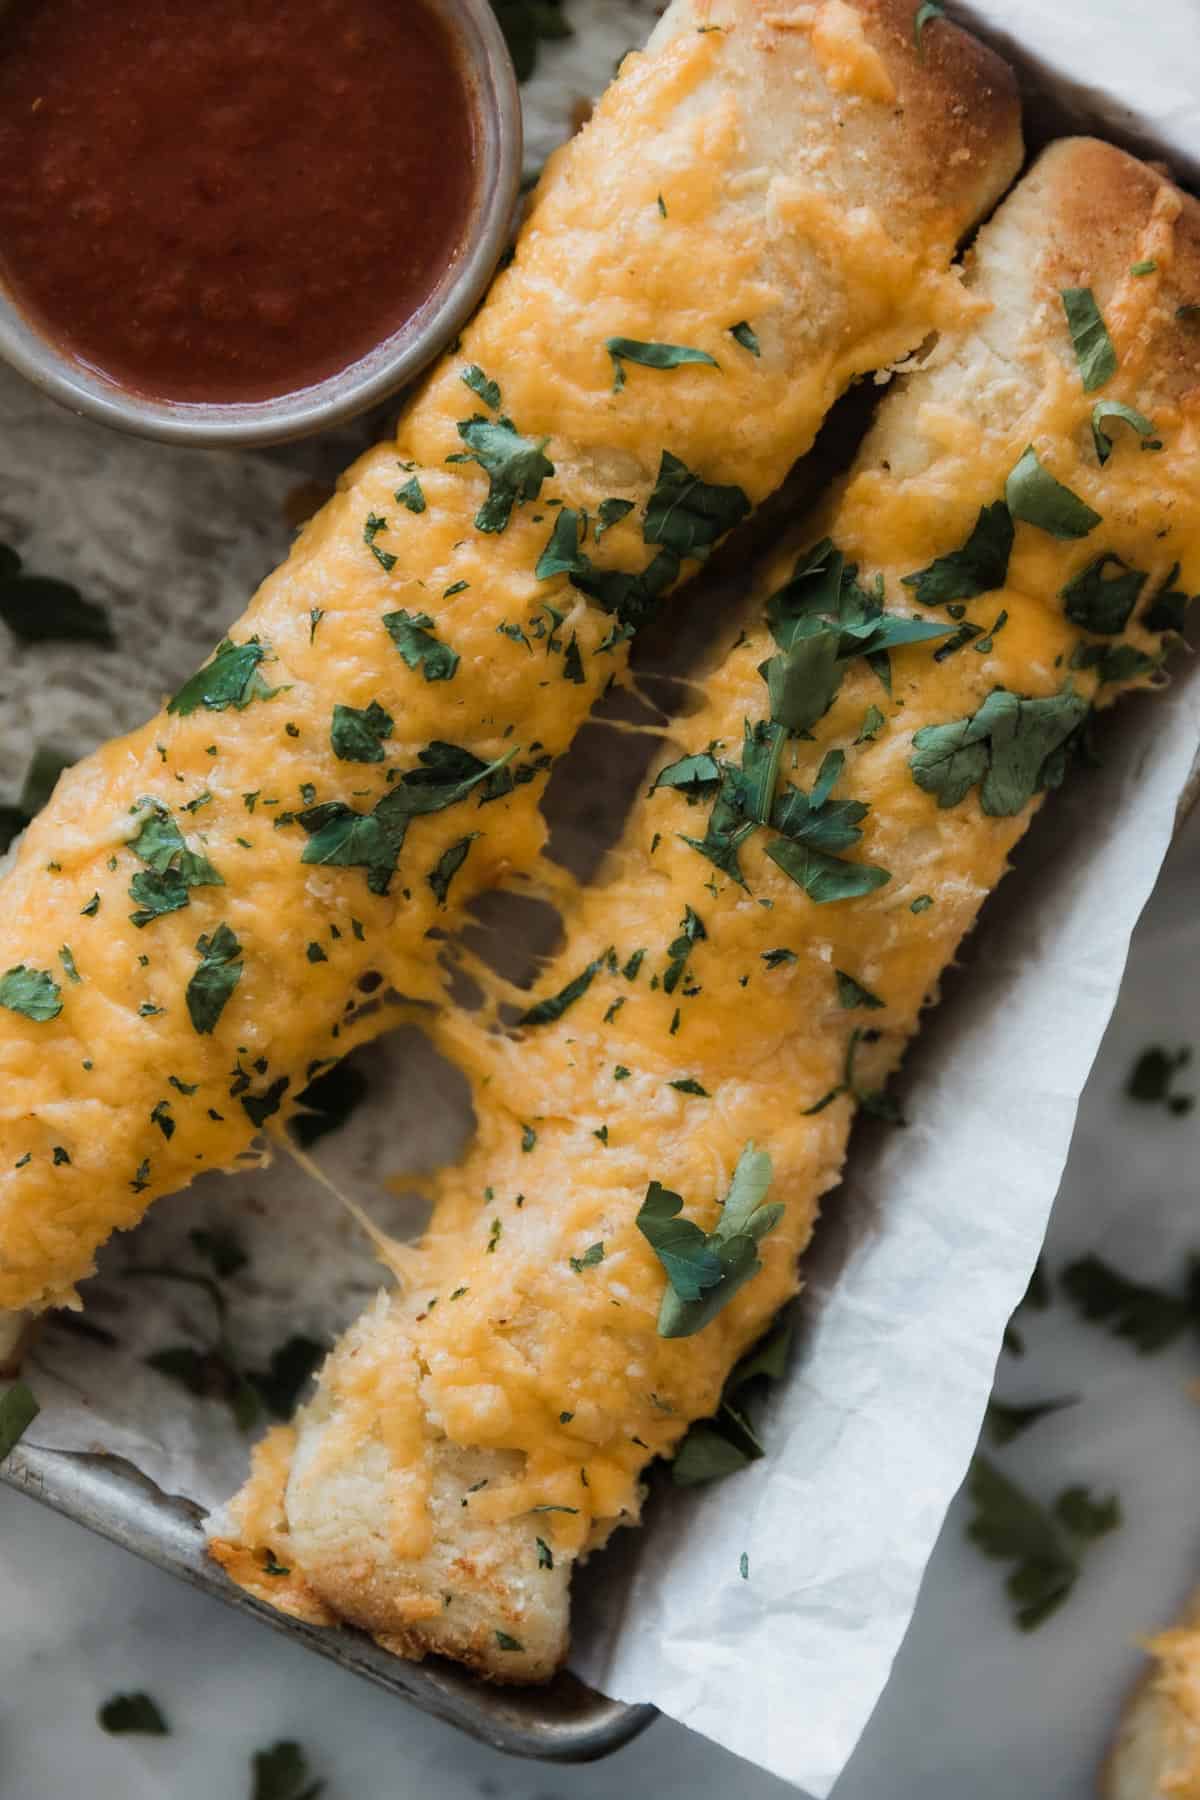 Two cheesy breadsticks with parsley and cup of marinara.